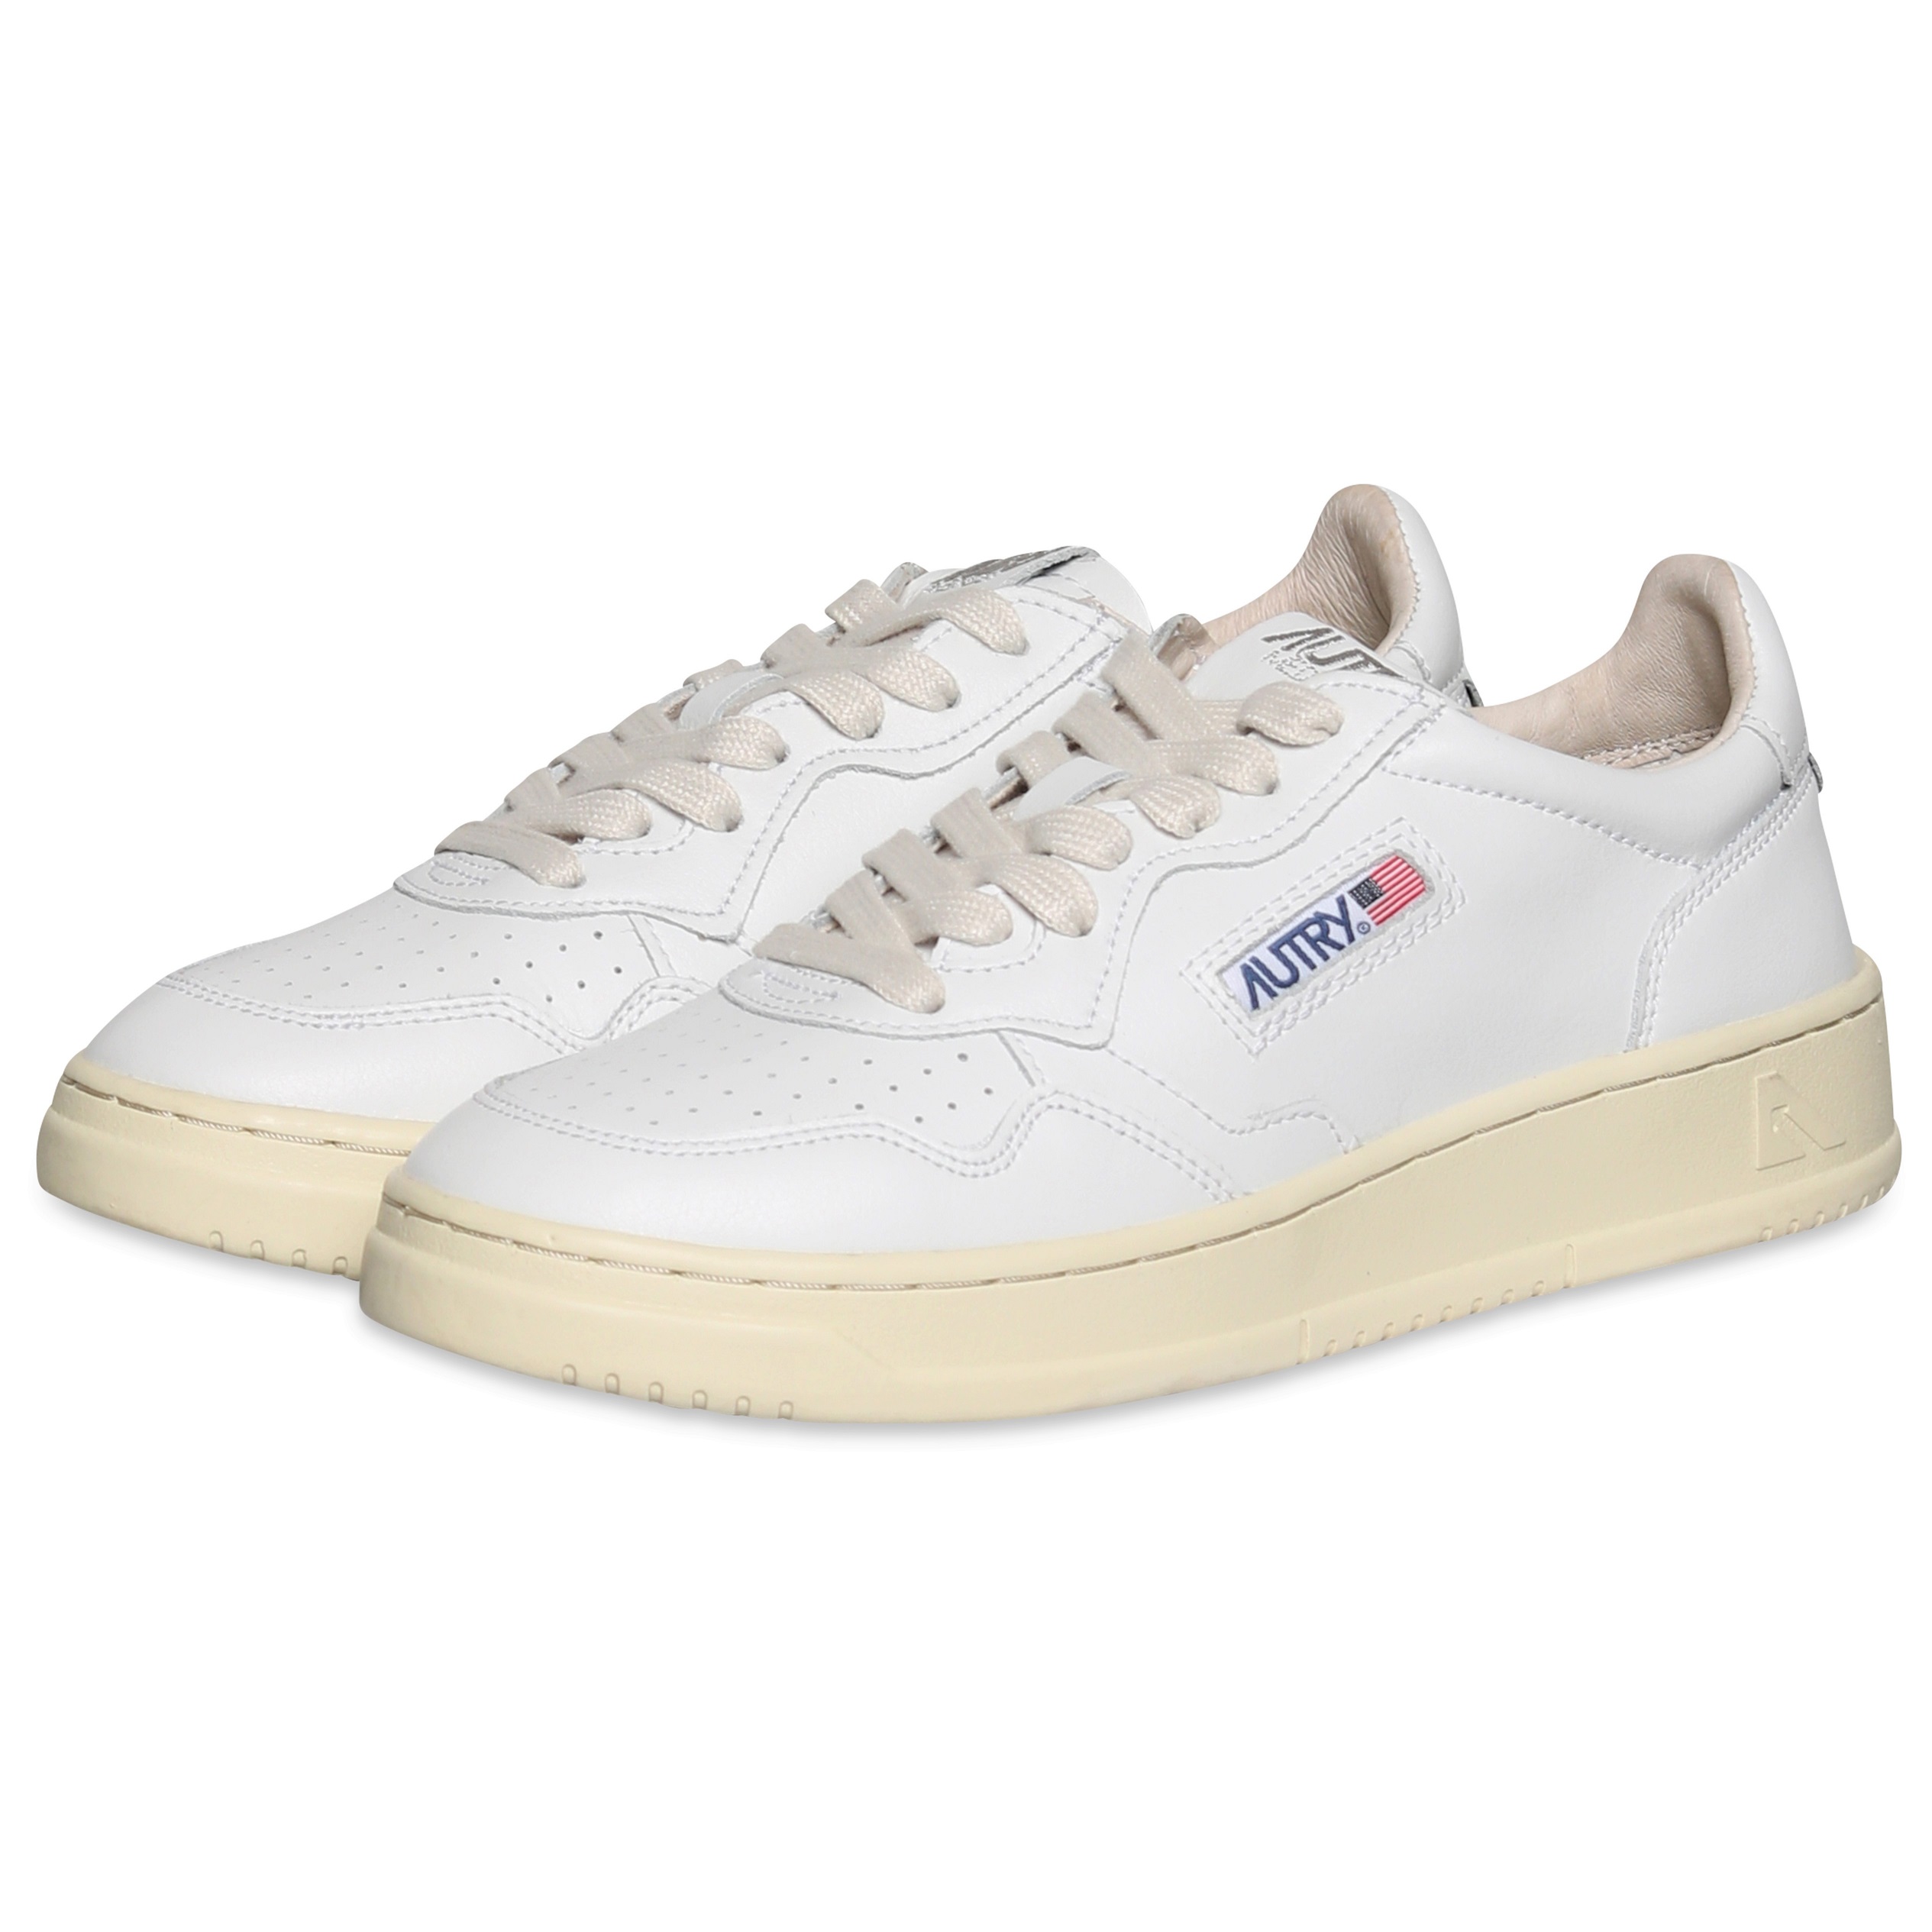 Autry Action Shoes Low Sneaker White/Draw Action 39